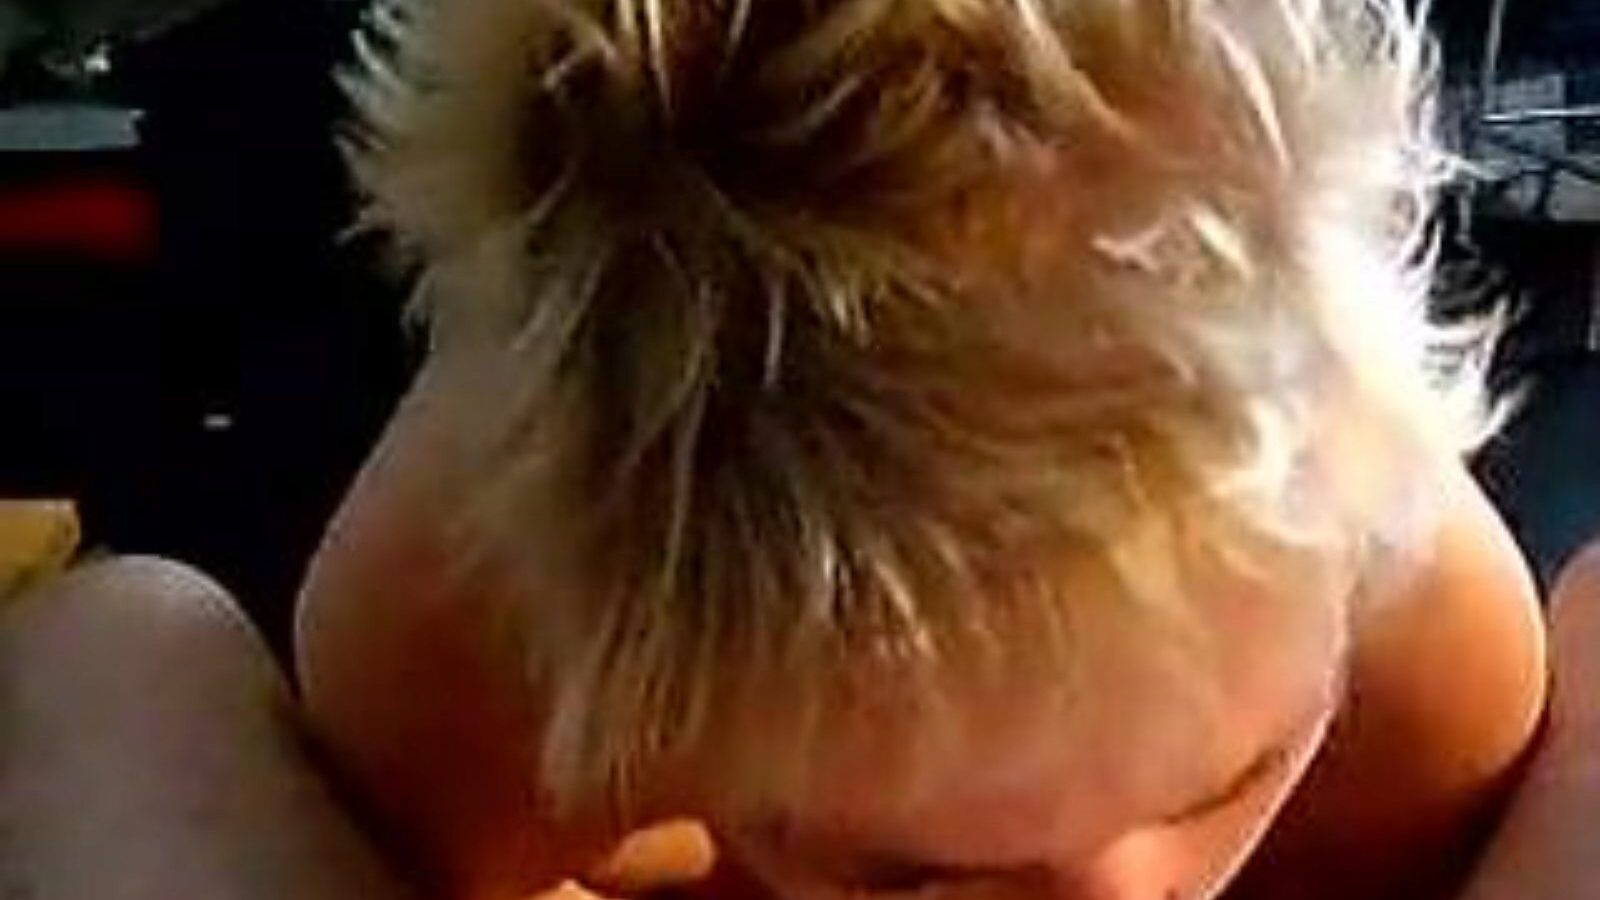 leuke dame：homemade＆old girl porn video a6-xhamster watch leuke dame tube fuckfest movie for free on xhamster、with the hotest collection of dutch homemade、old girl＆sucking pornography clip gigs